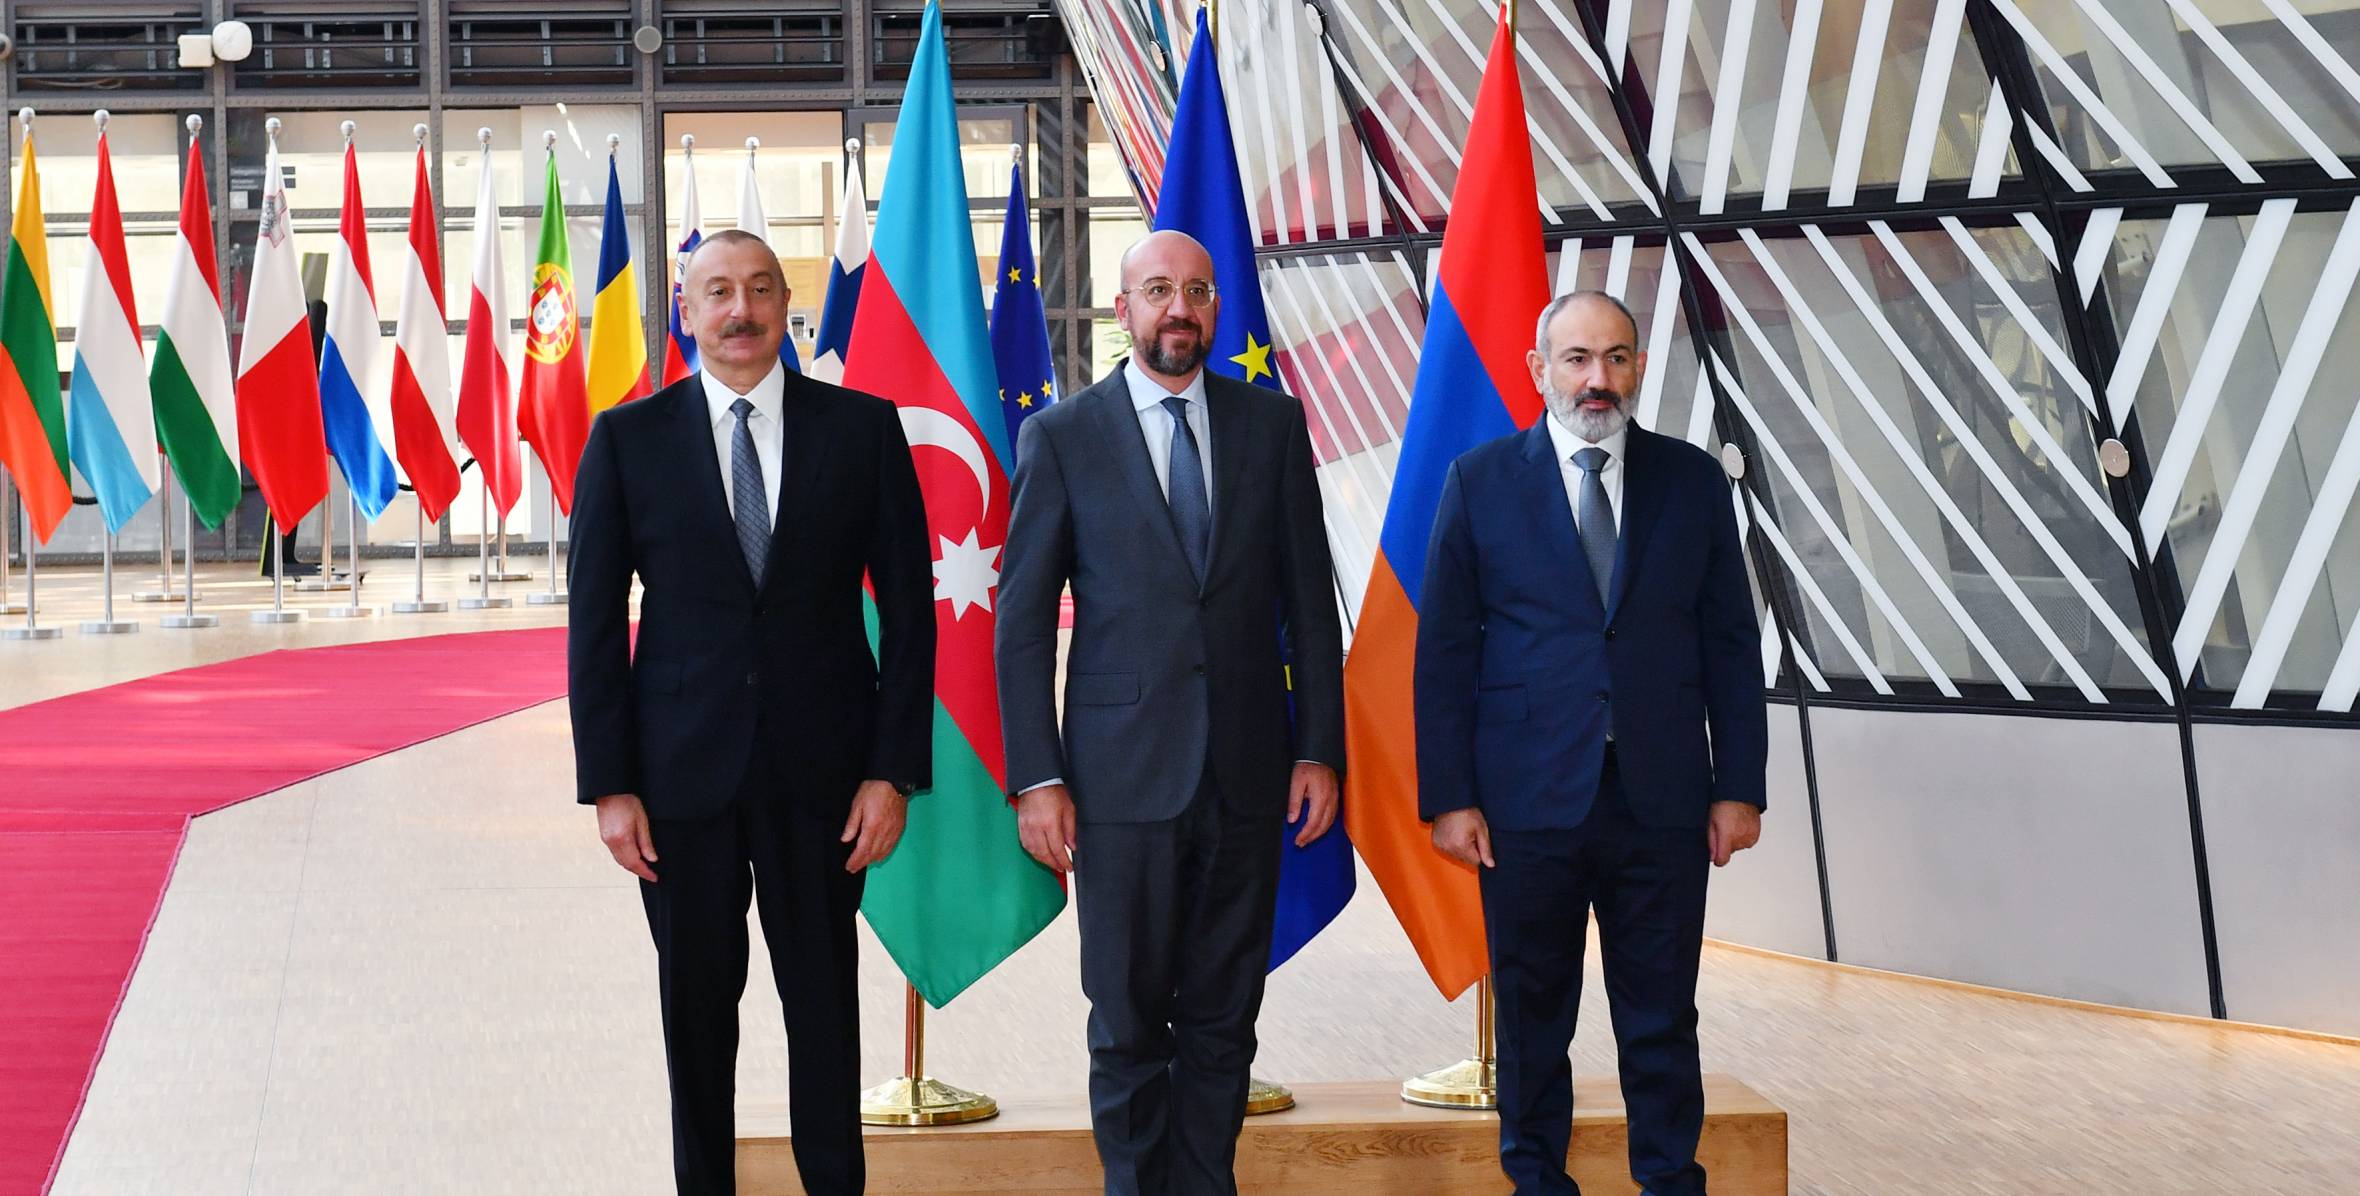 Brussels hosted meeting of President Ilham Aliyev with President of European Council Charles Michel and Prime Minister of Armenia Nikol Pashinyan